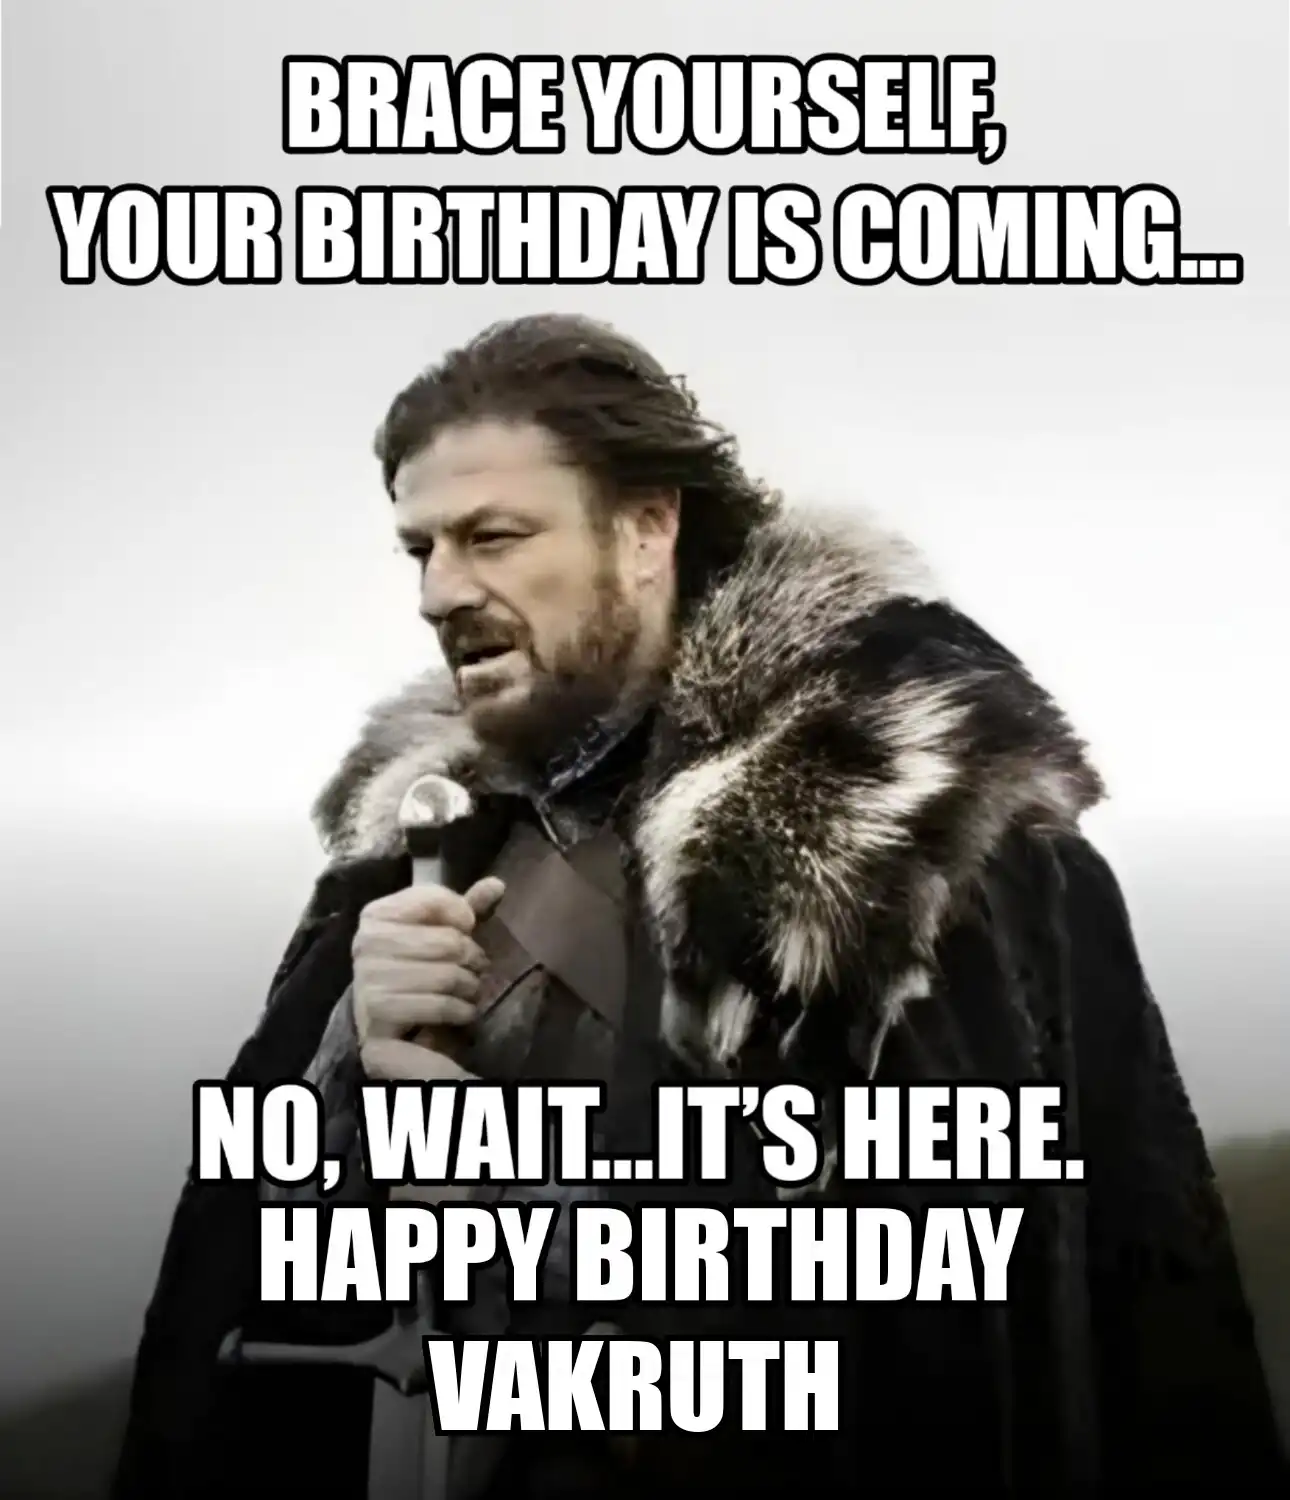 Happy Birthday Vakruth Brace Yourself Your Birthday Is Coming Meme